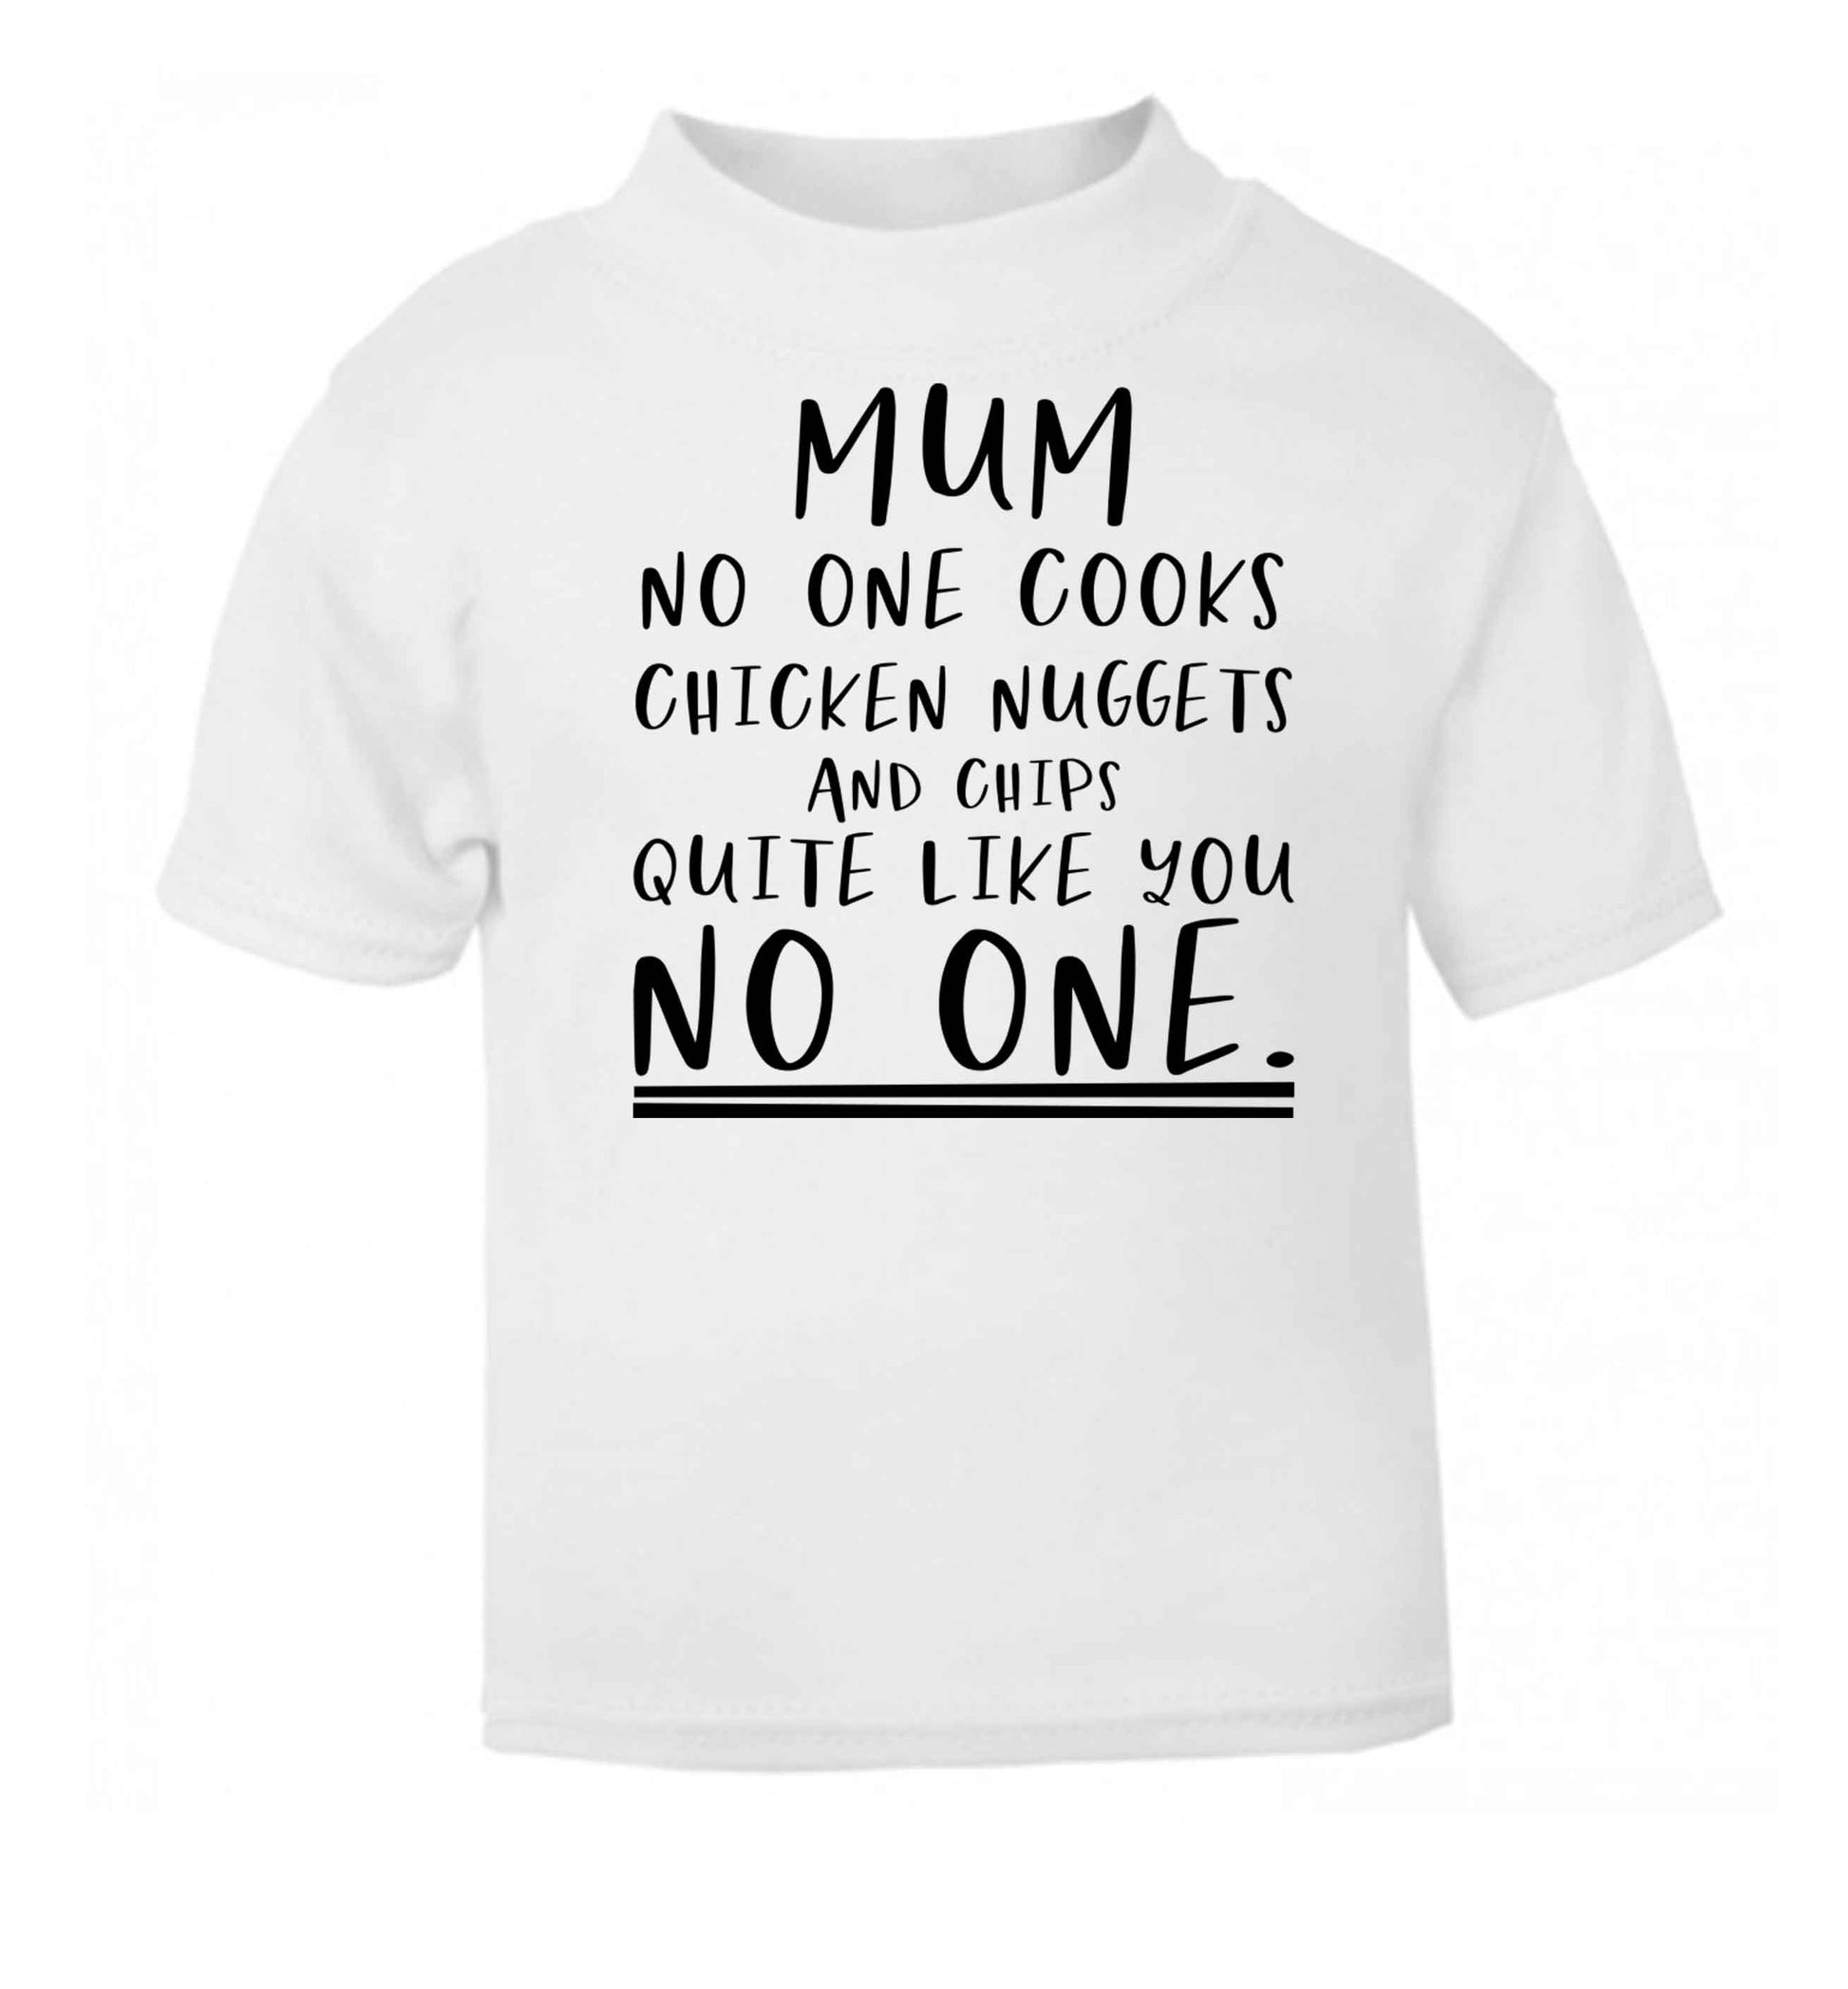 Super funny sassy gift for mother's day or birthday!  Mum no one cooks chicken nuggets and chips like you no one white baby toddler Tshirt 2 Years